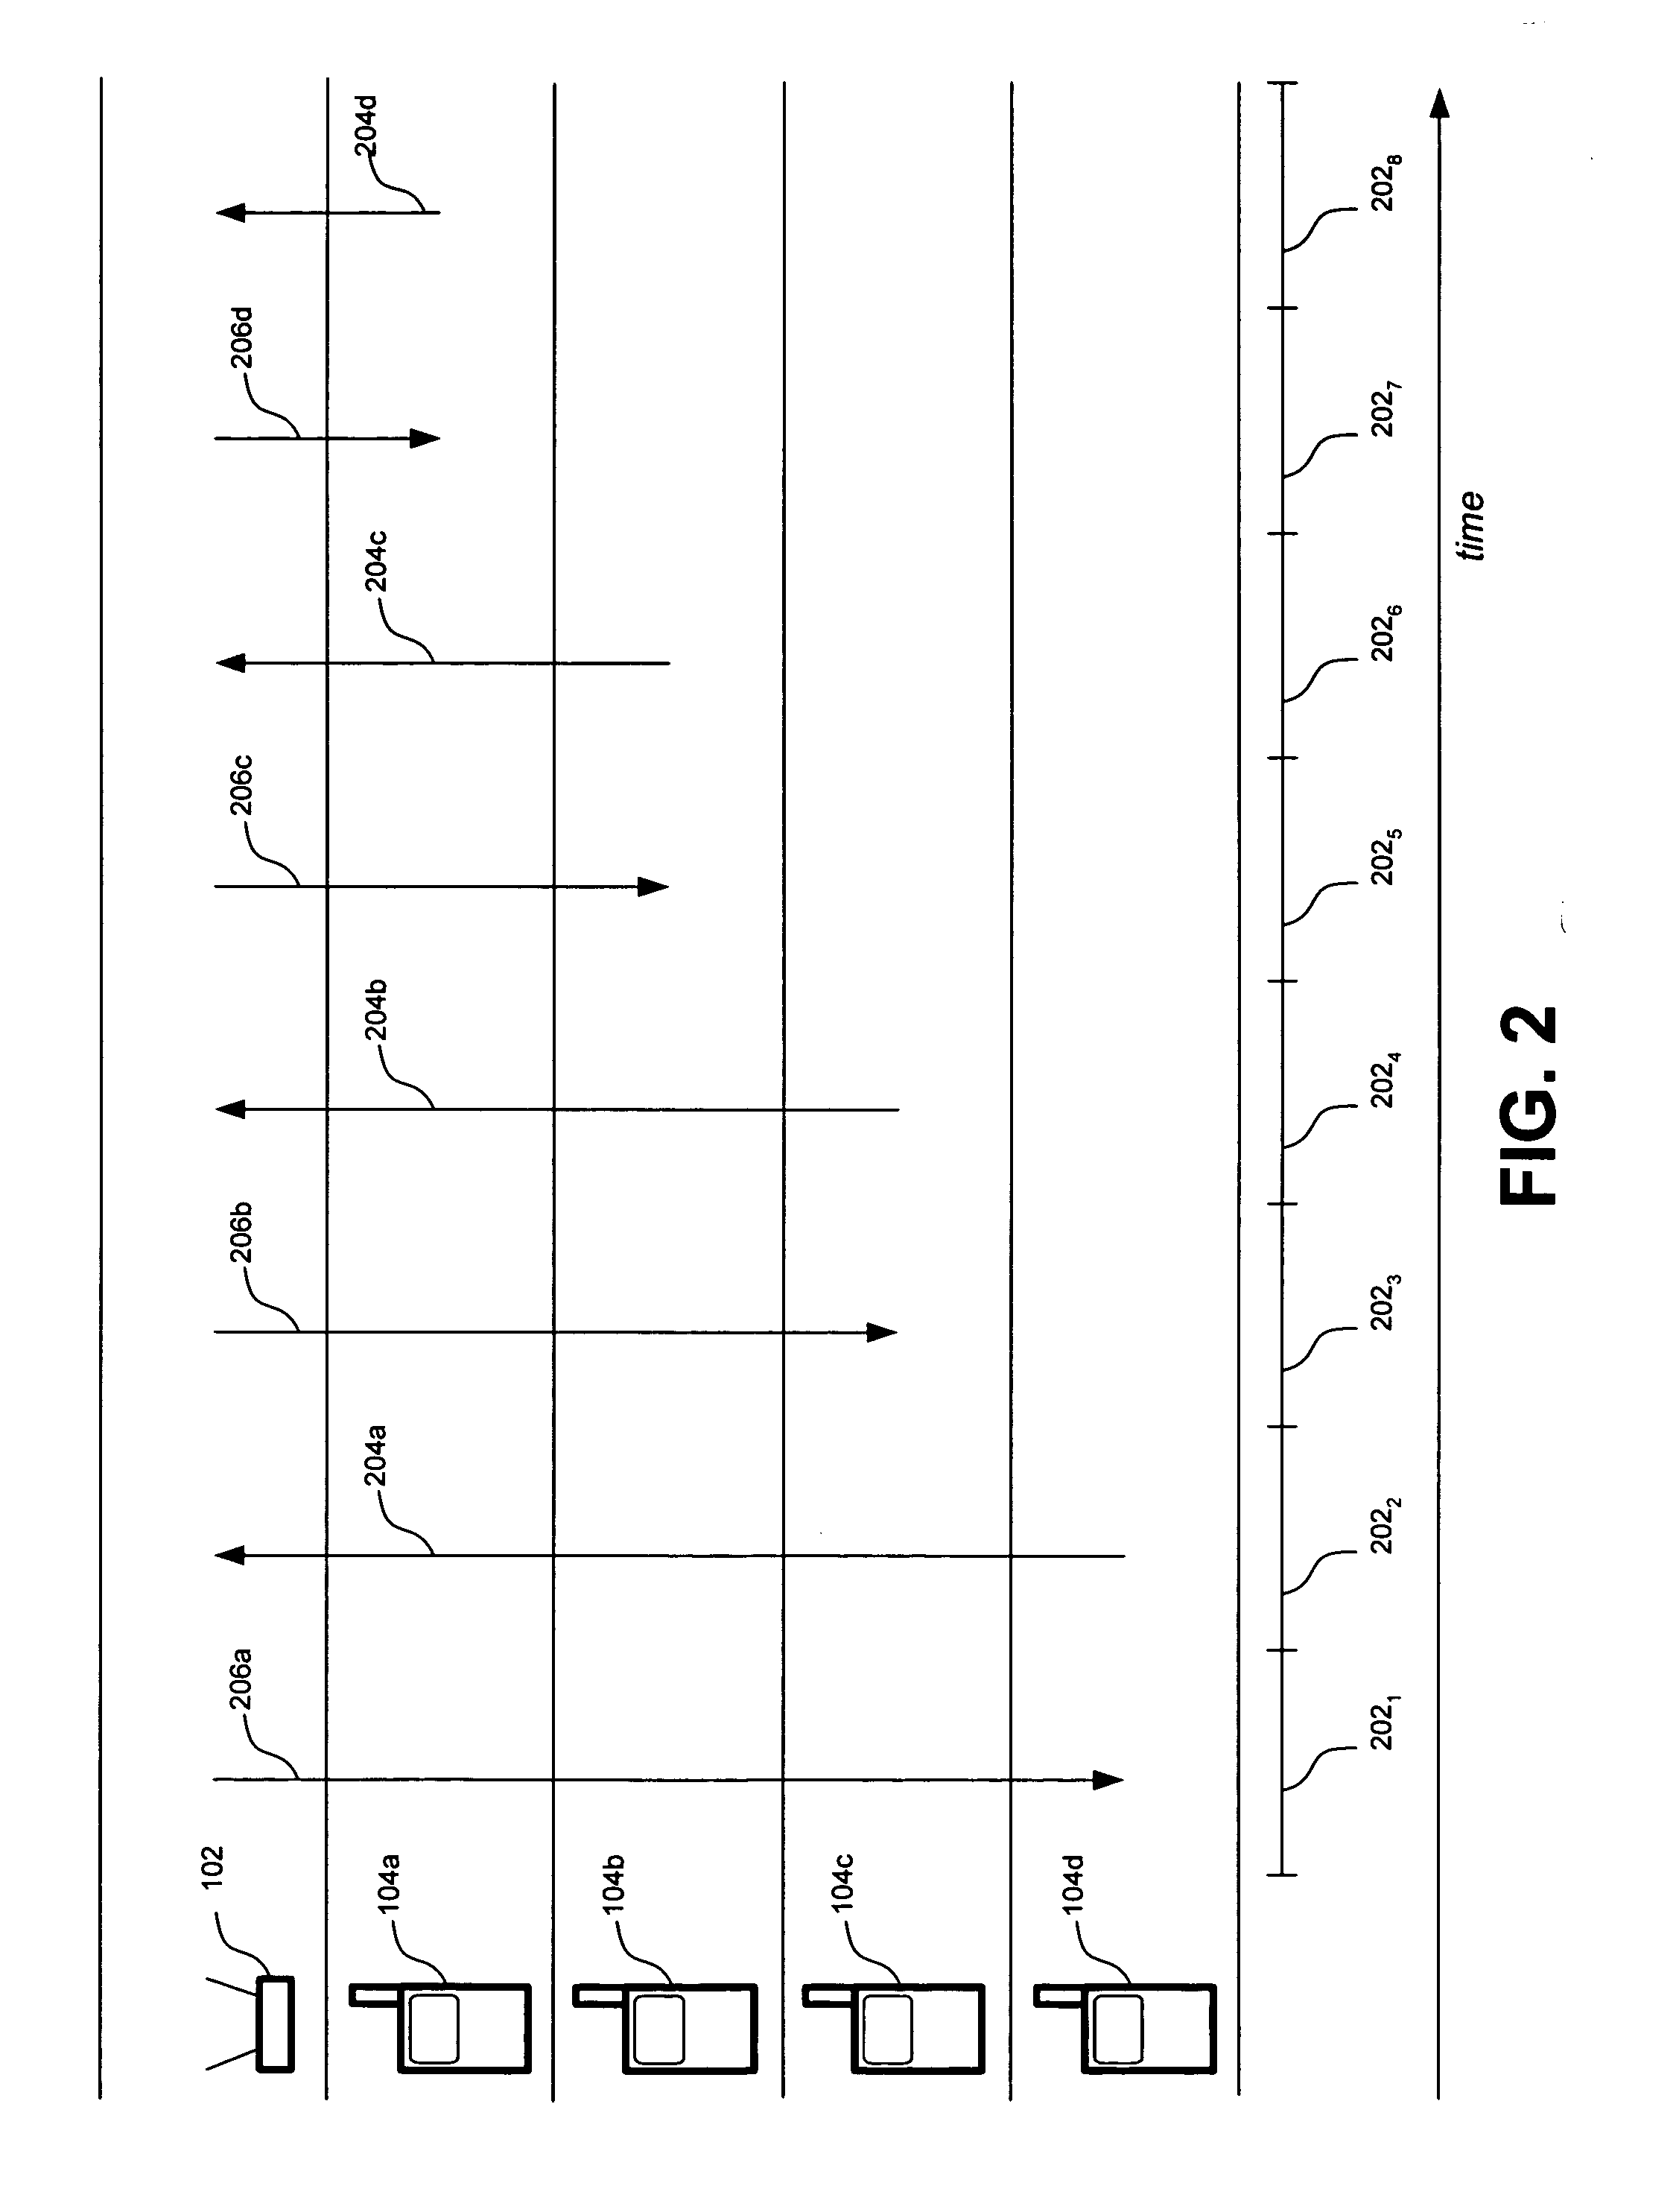 Multicast and broadcast data transmission in a short-range wireless communications network